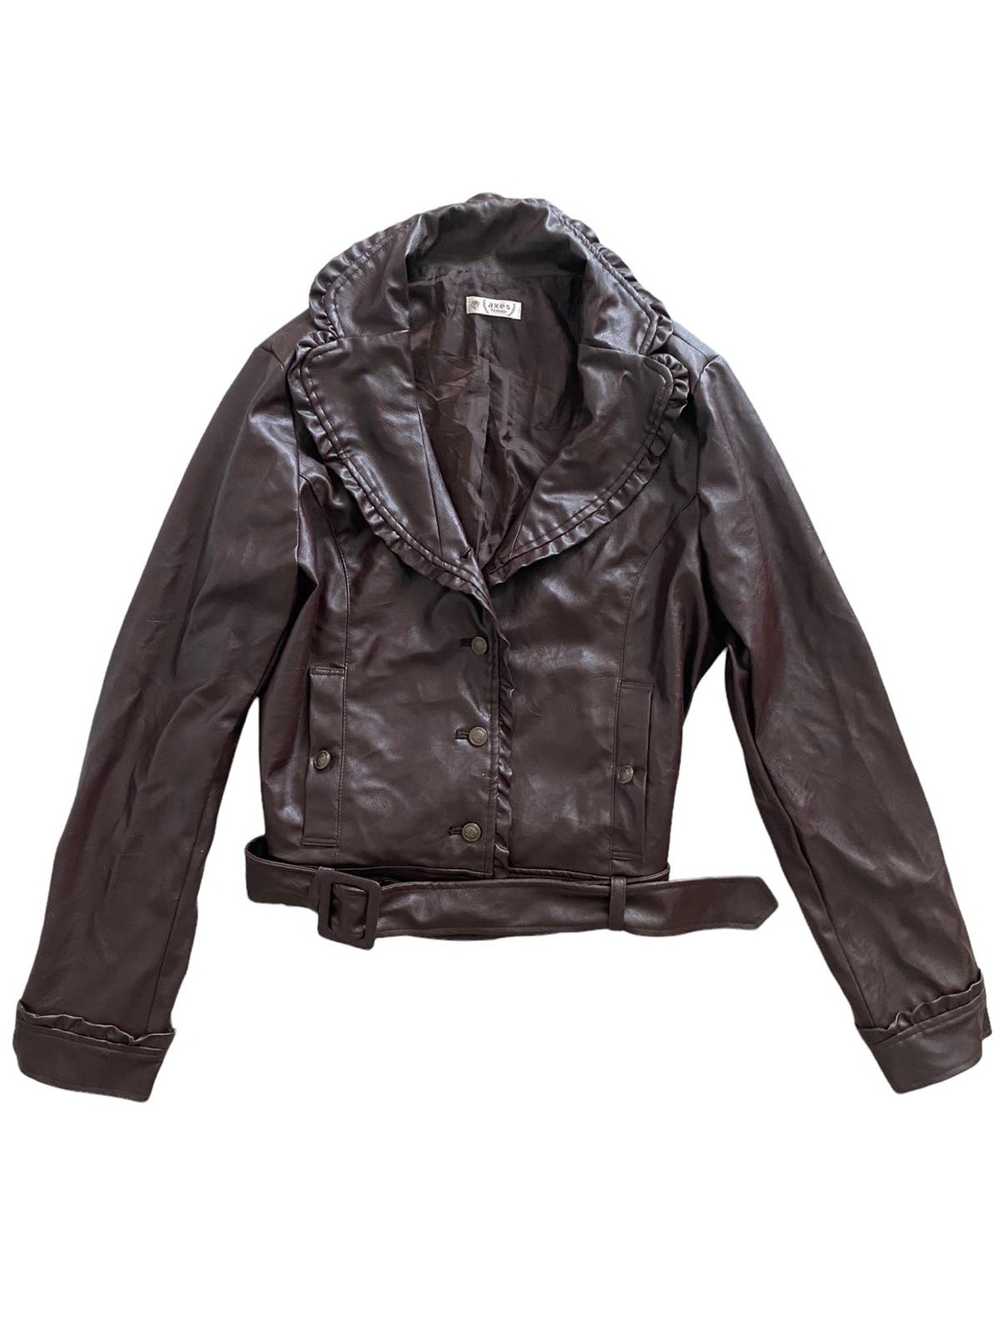 Japanese Brand × Leather Jacket × Seditionaries A… - image 12